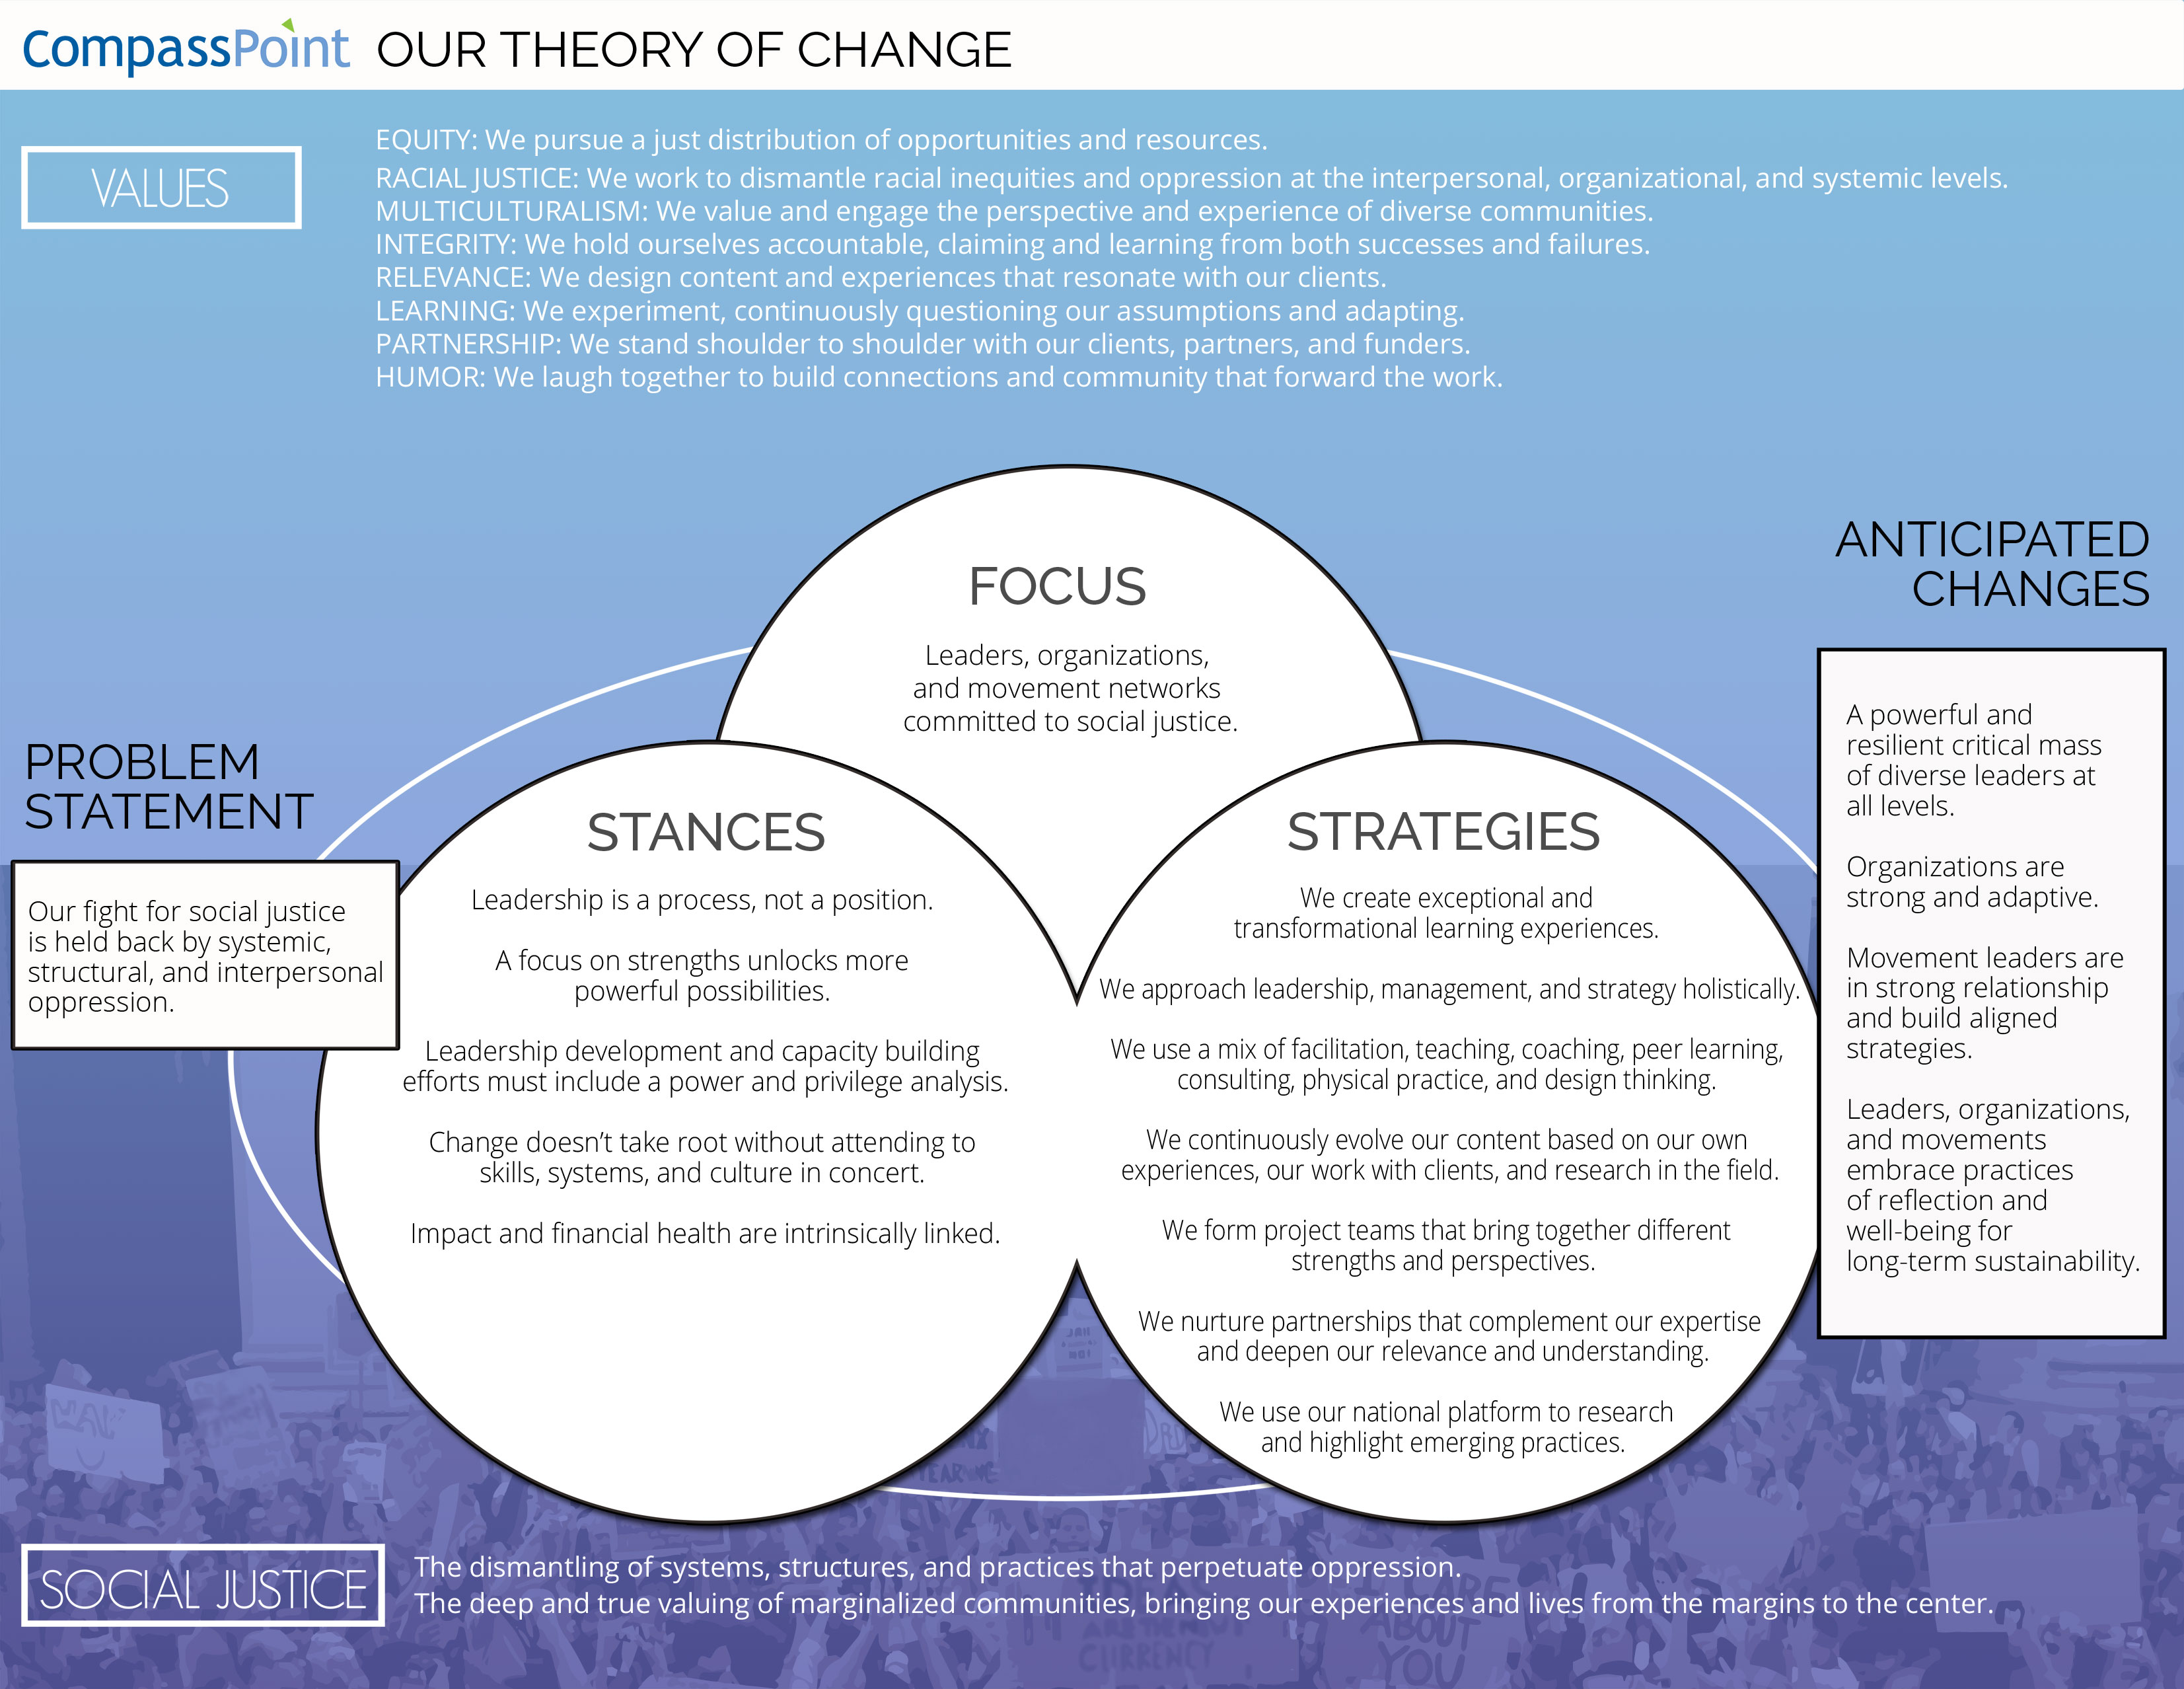 CompassPoint-Theory-of-Change